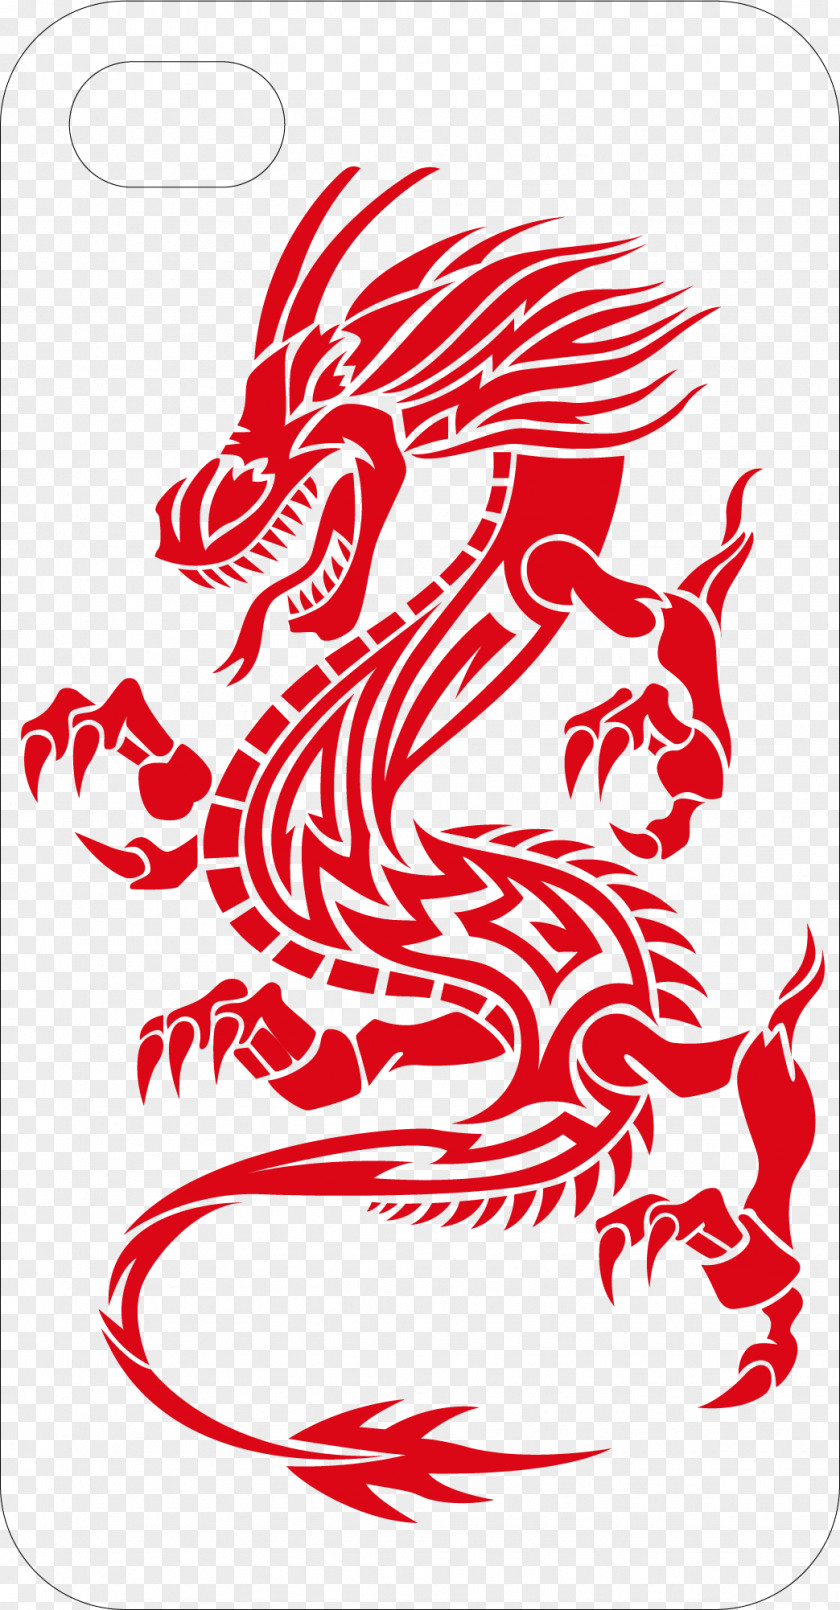 Long Beautiful Mobile Phone Shell Tattoo Dragon Tribe Illustration PNG